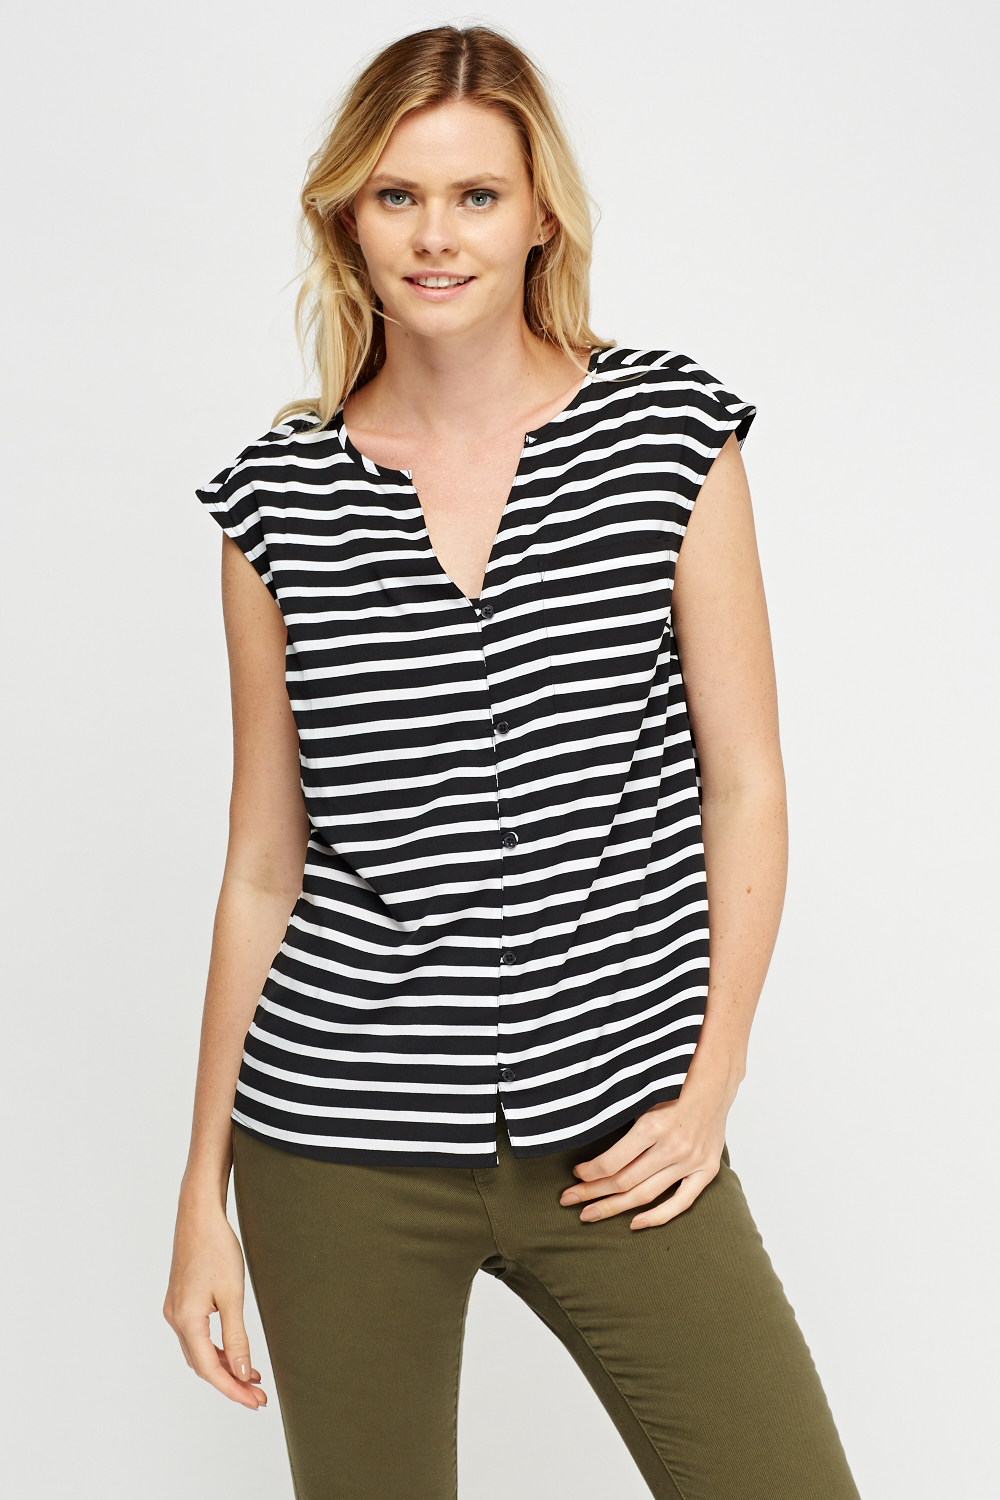 Striped Sleeveless Blouse - Just $1